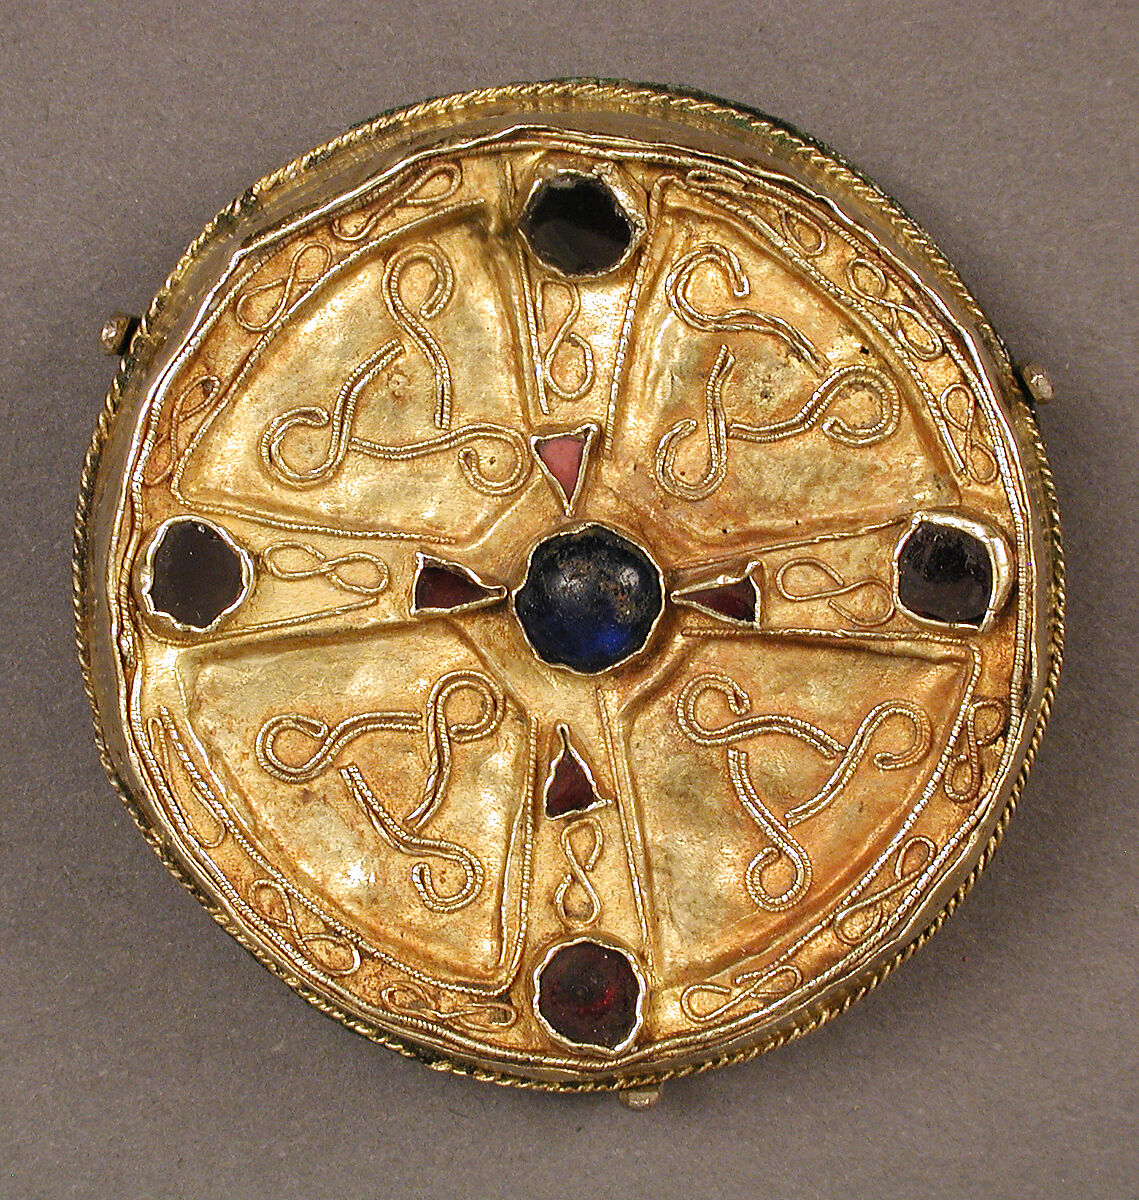 Disk Brooch, Gold, copper alloy, garnet and glass, Frankish 